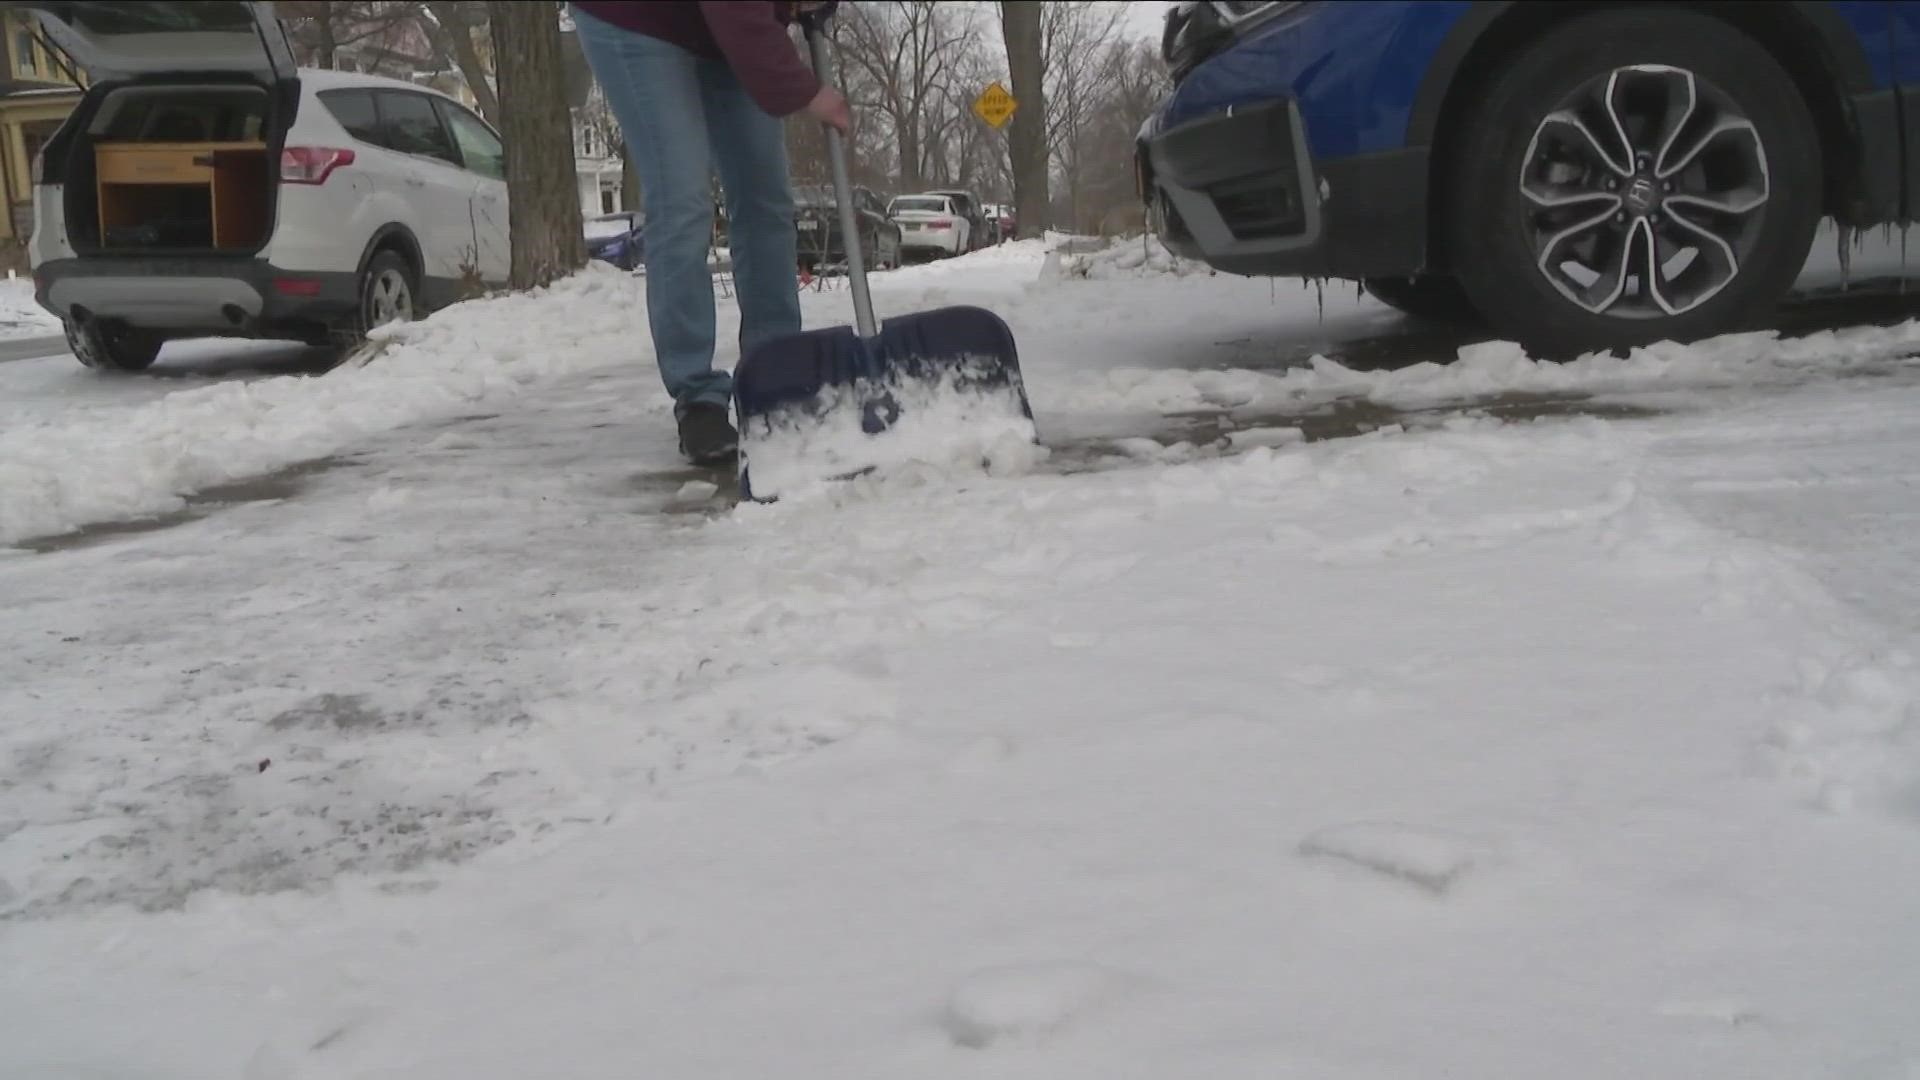 Across the city is a similar sight: downed trees, broken branches, and ice-filled pot holes.